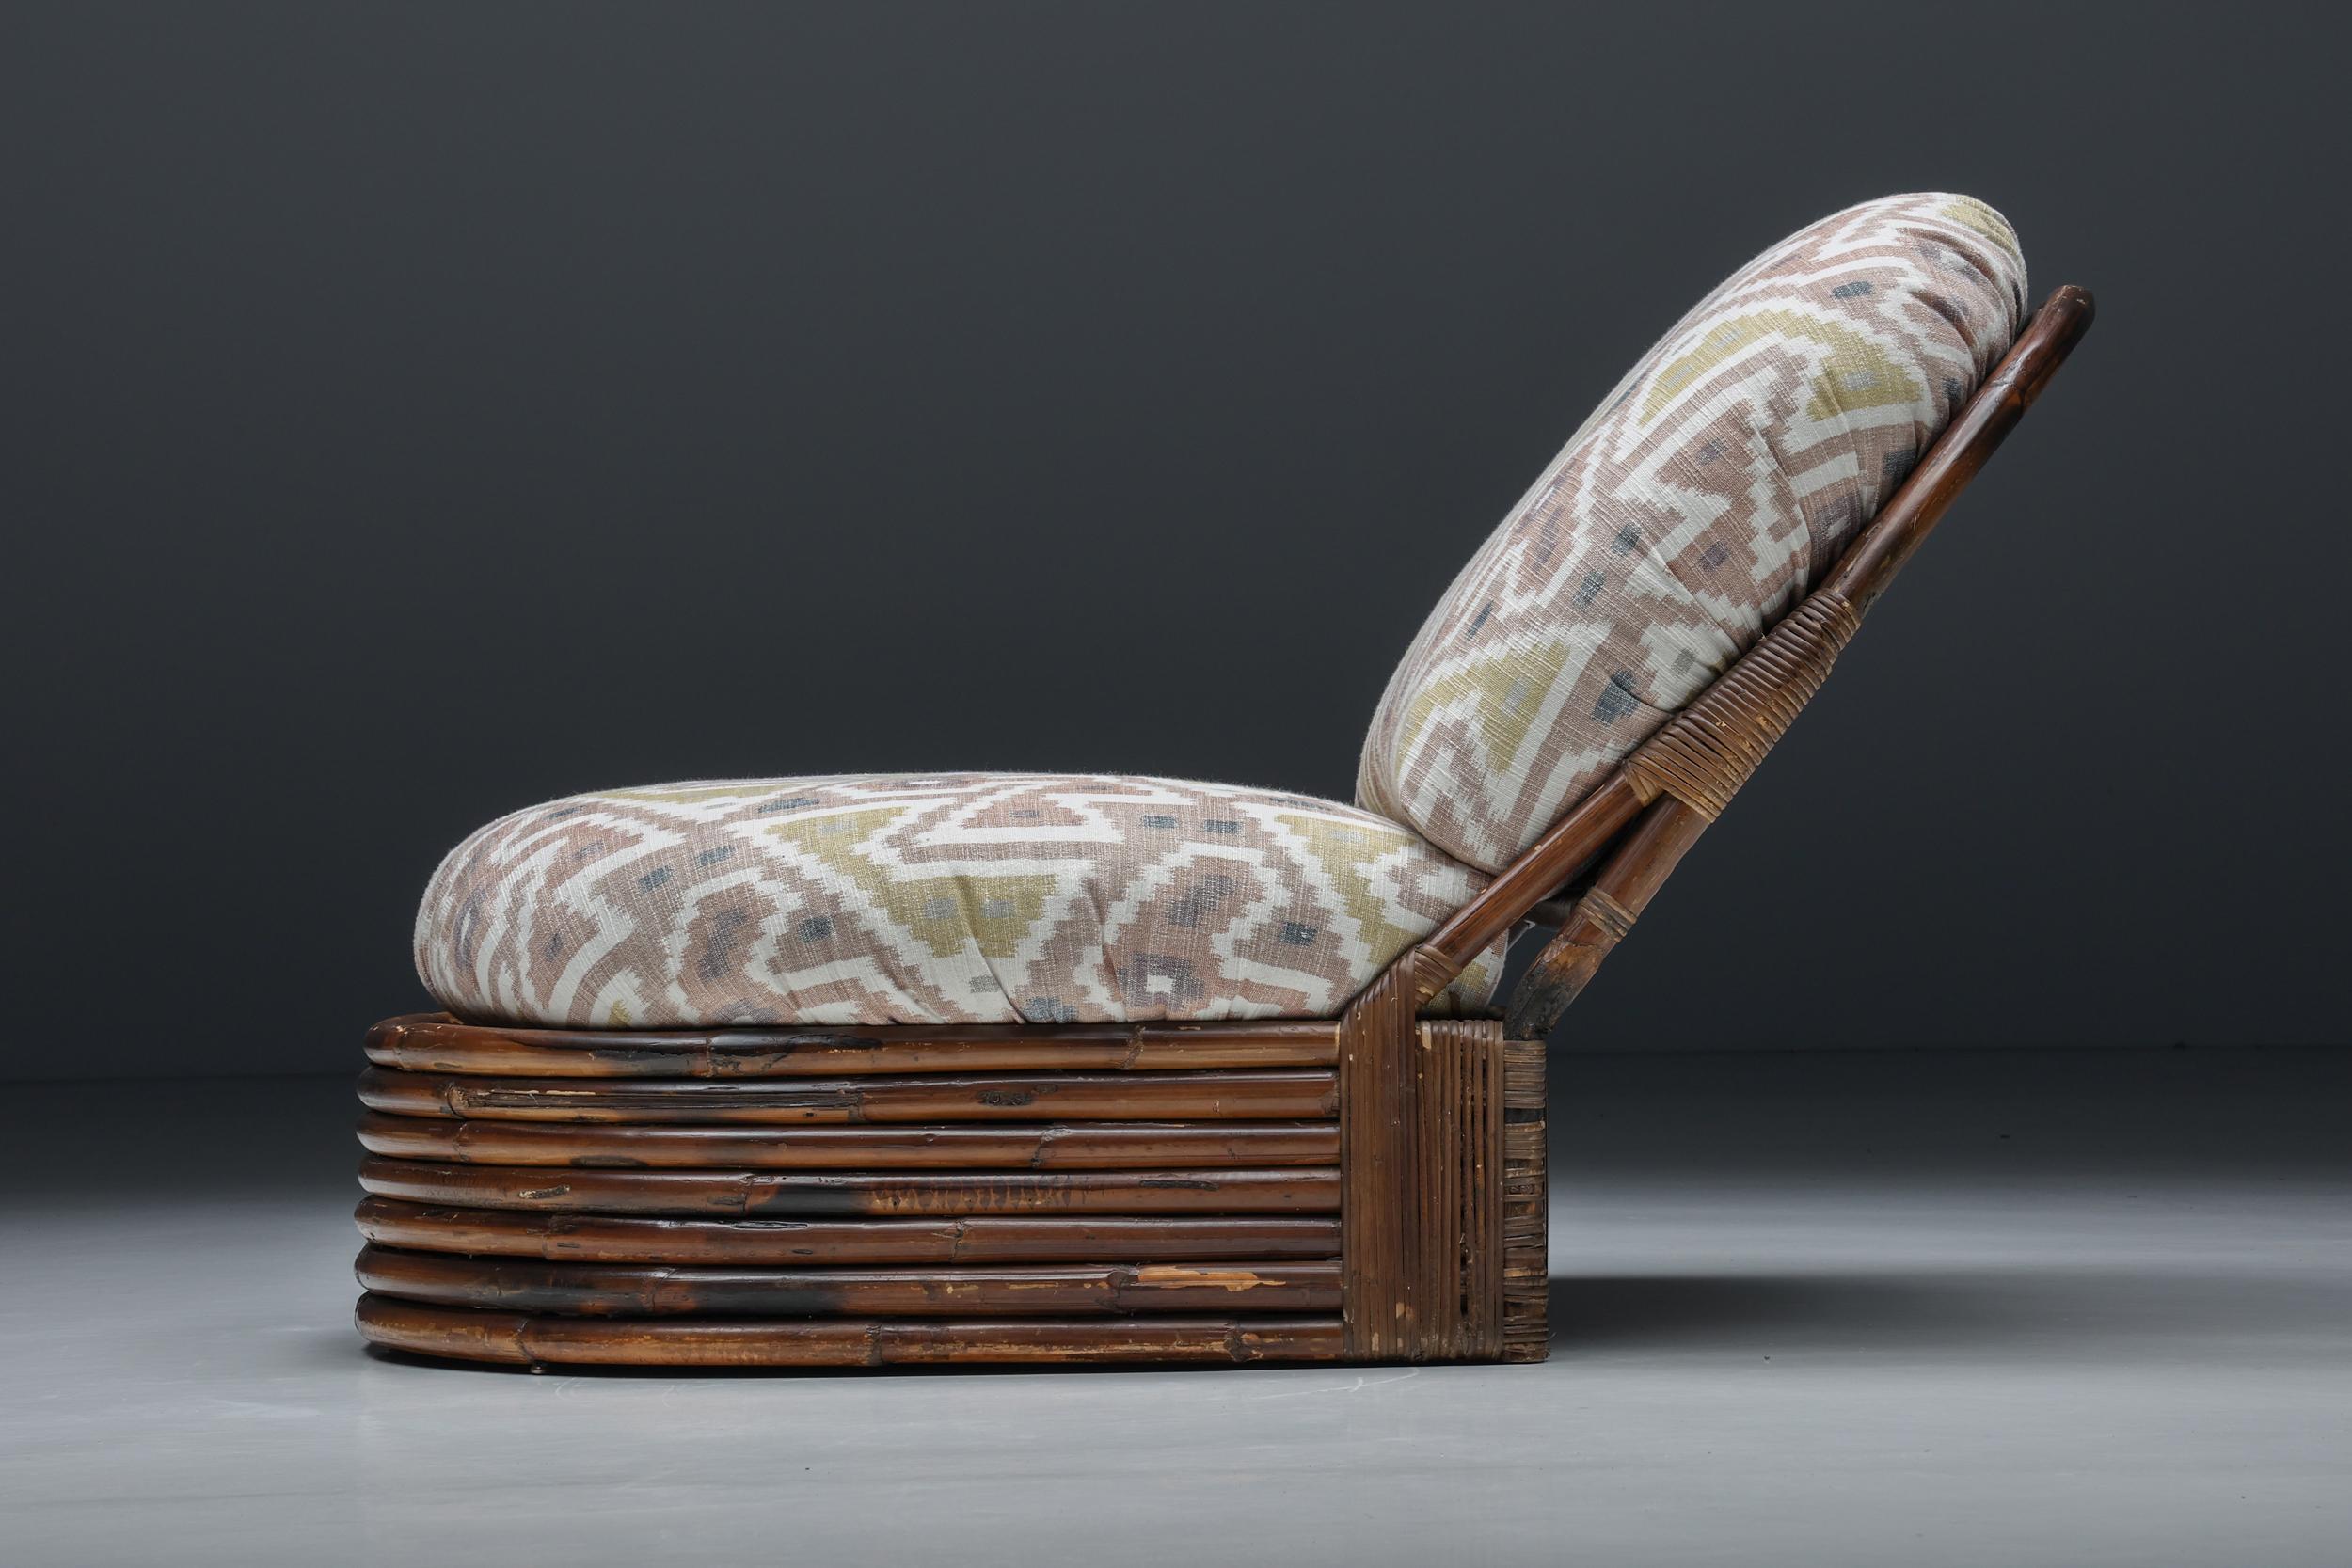 Vivai Del Sud Bamboo Lounge Chairs, Pierre Frey Jacquard, 1970s For Sale 1